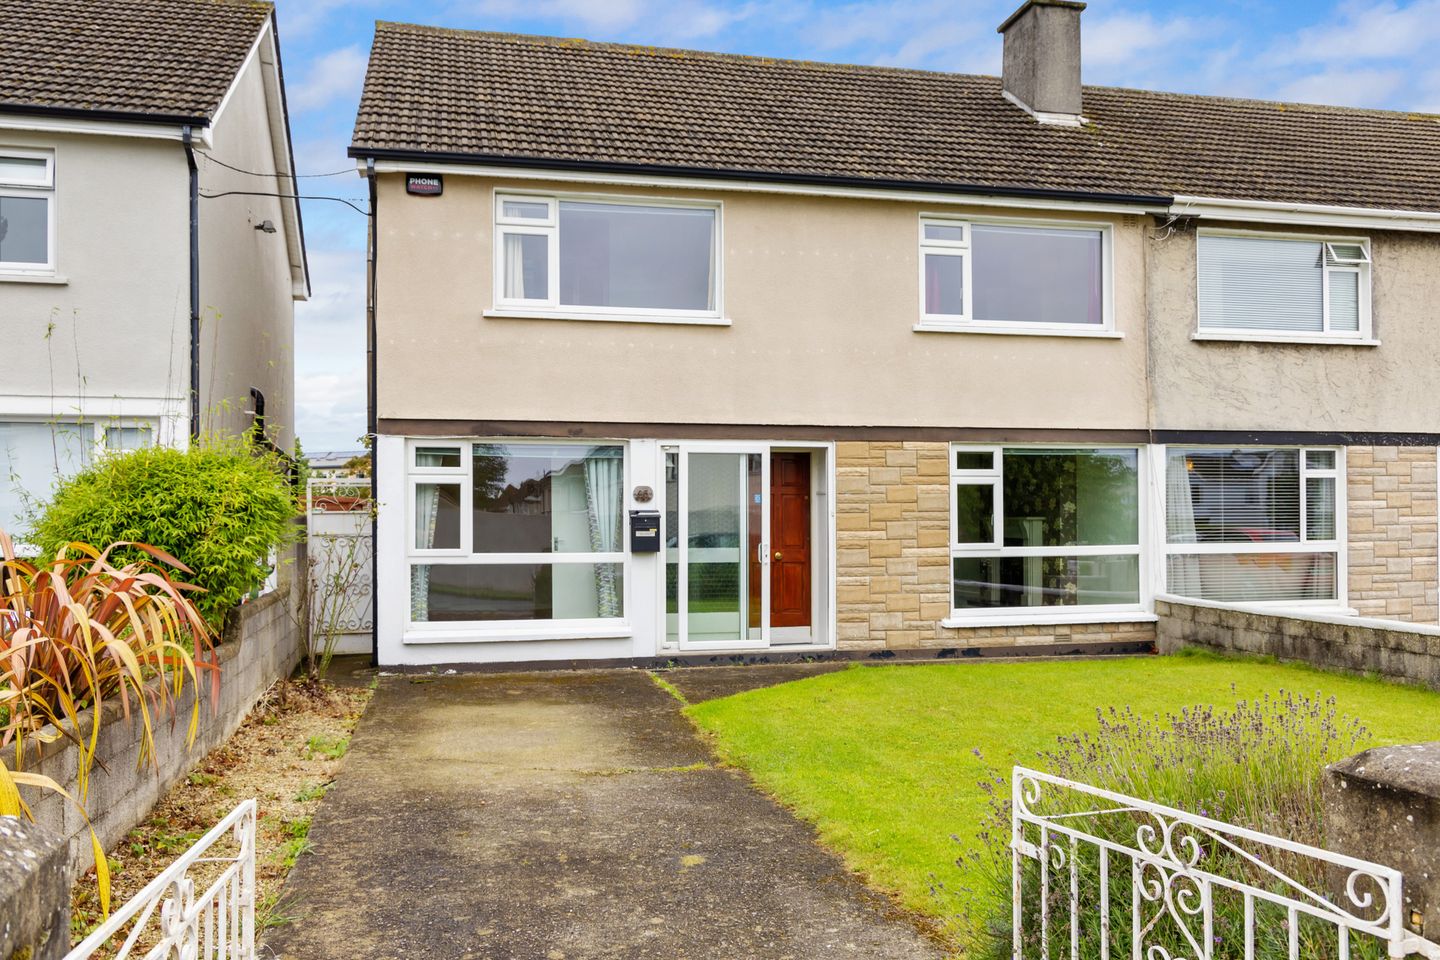 95 Ardmore Park, Bray, Co. Wicklow, A98DK22